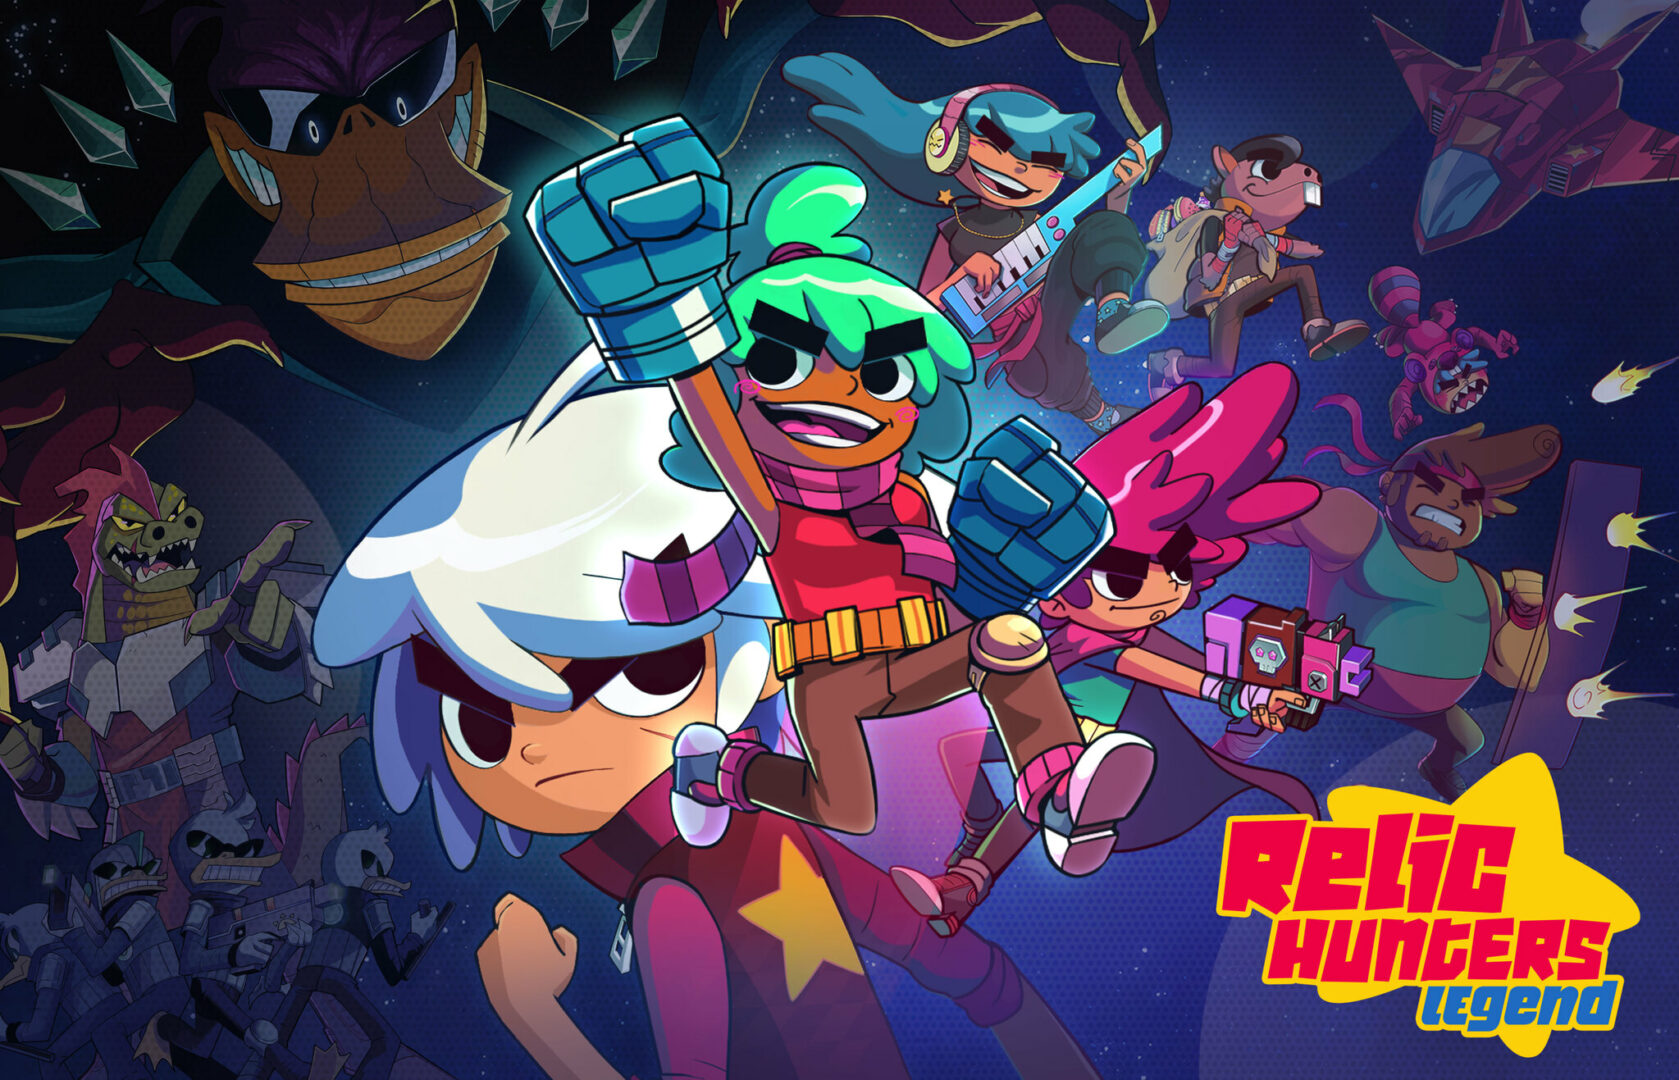 Relic Hunters Legend Trailer Dropped During Game Awards